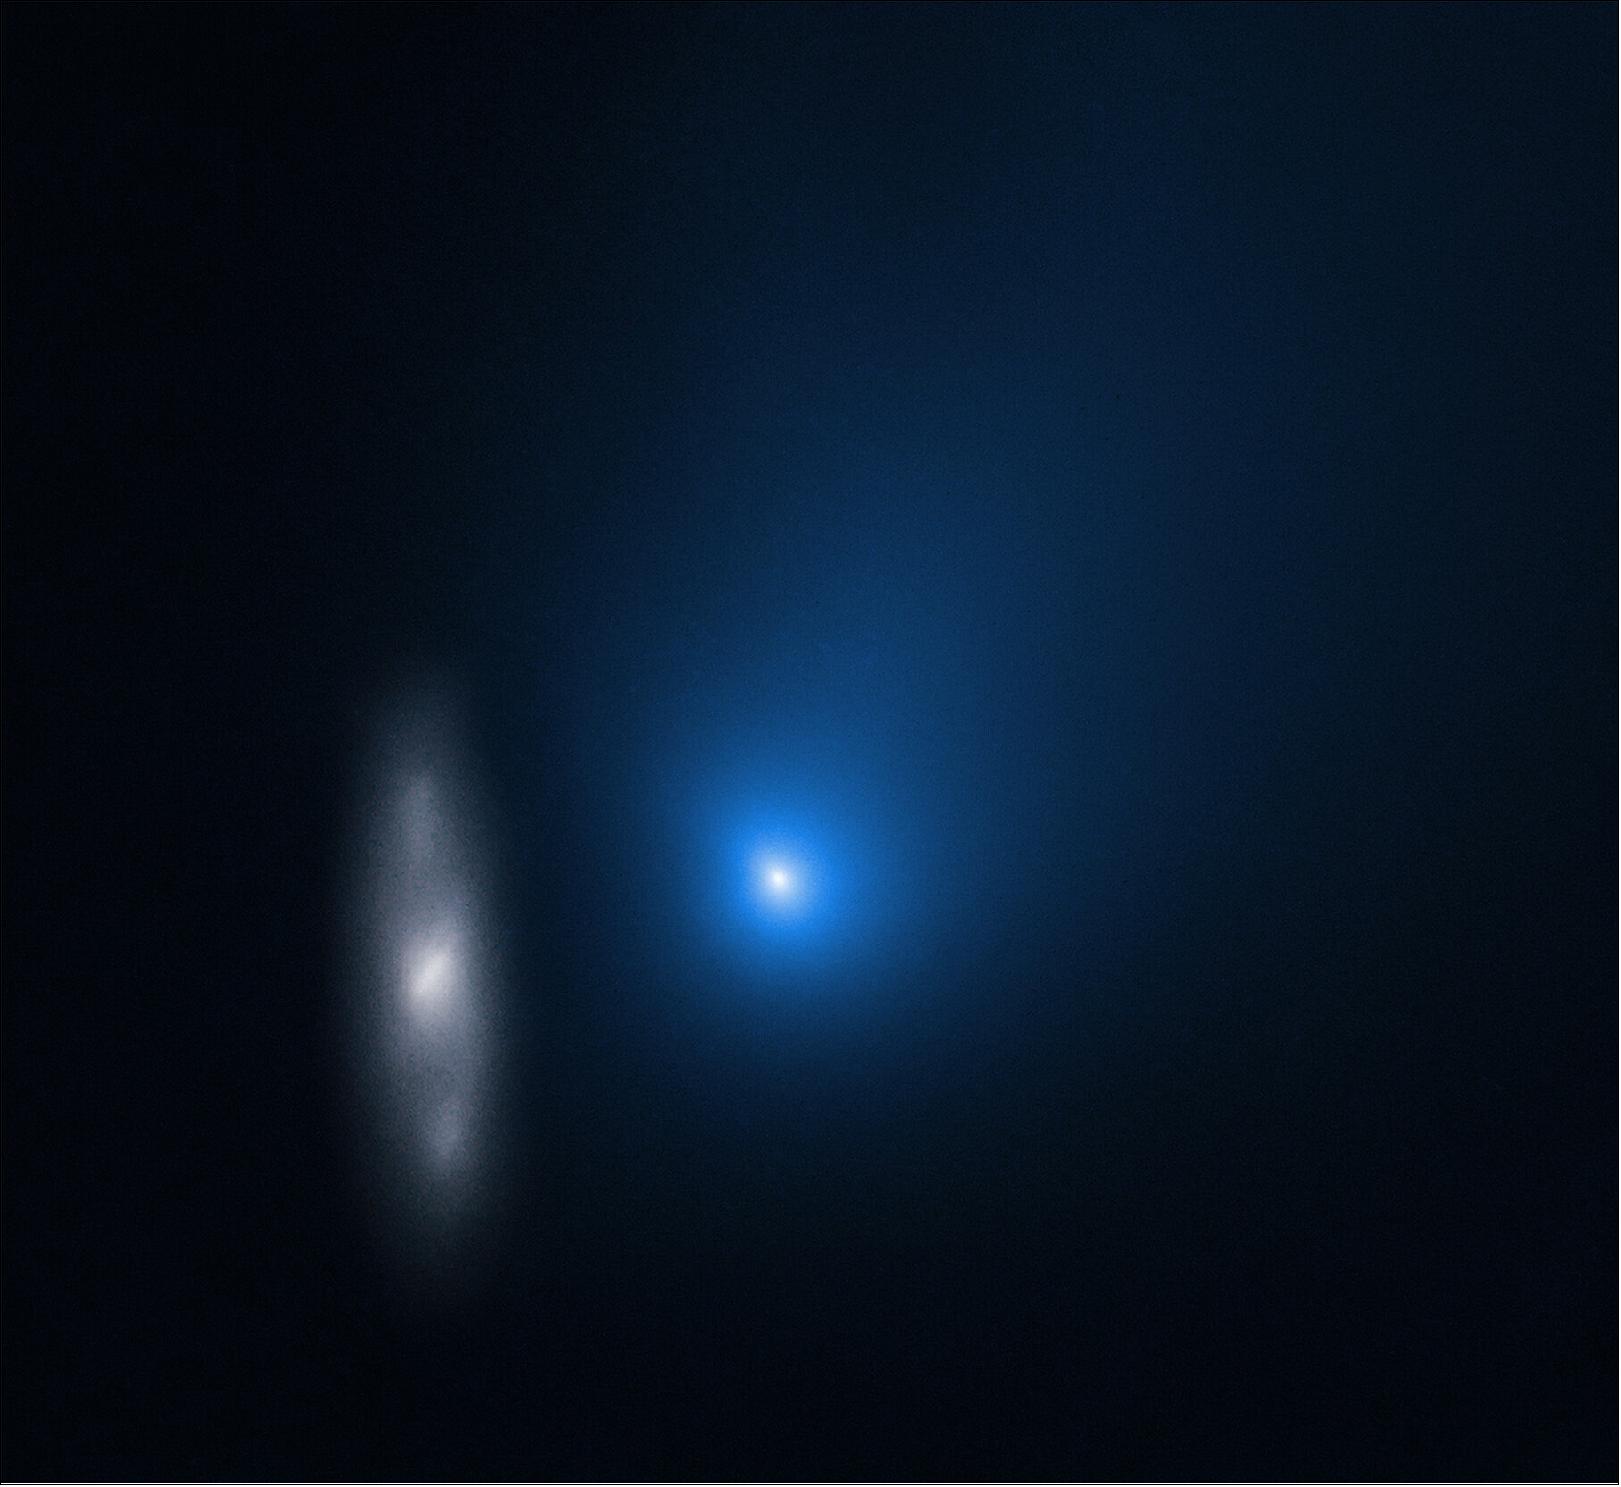 Figure 5: Comet 2I/Borisov and Distant Galaxy in November 2019 as observed by the Hubble Space Telescope (NASA, ESA, and D. Jewitt (UCLA) , CC BY 4.0) 7)